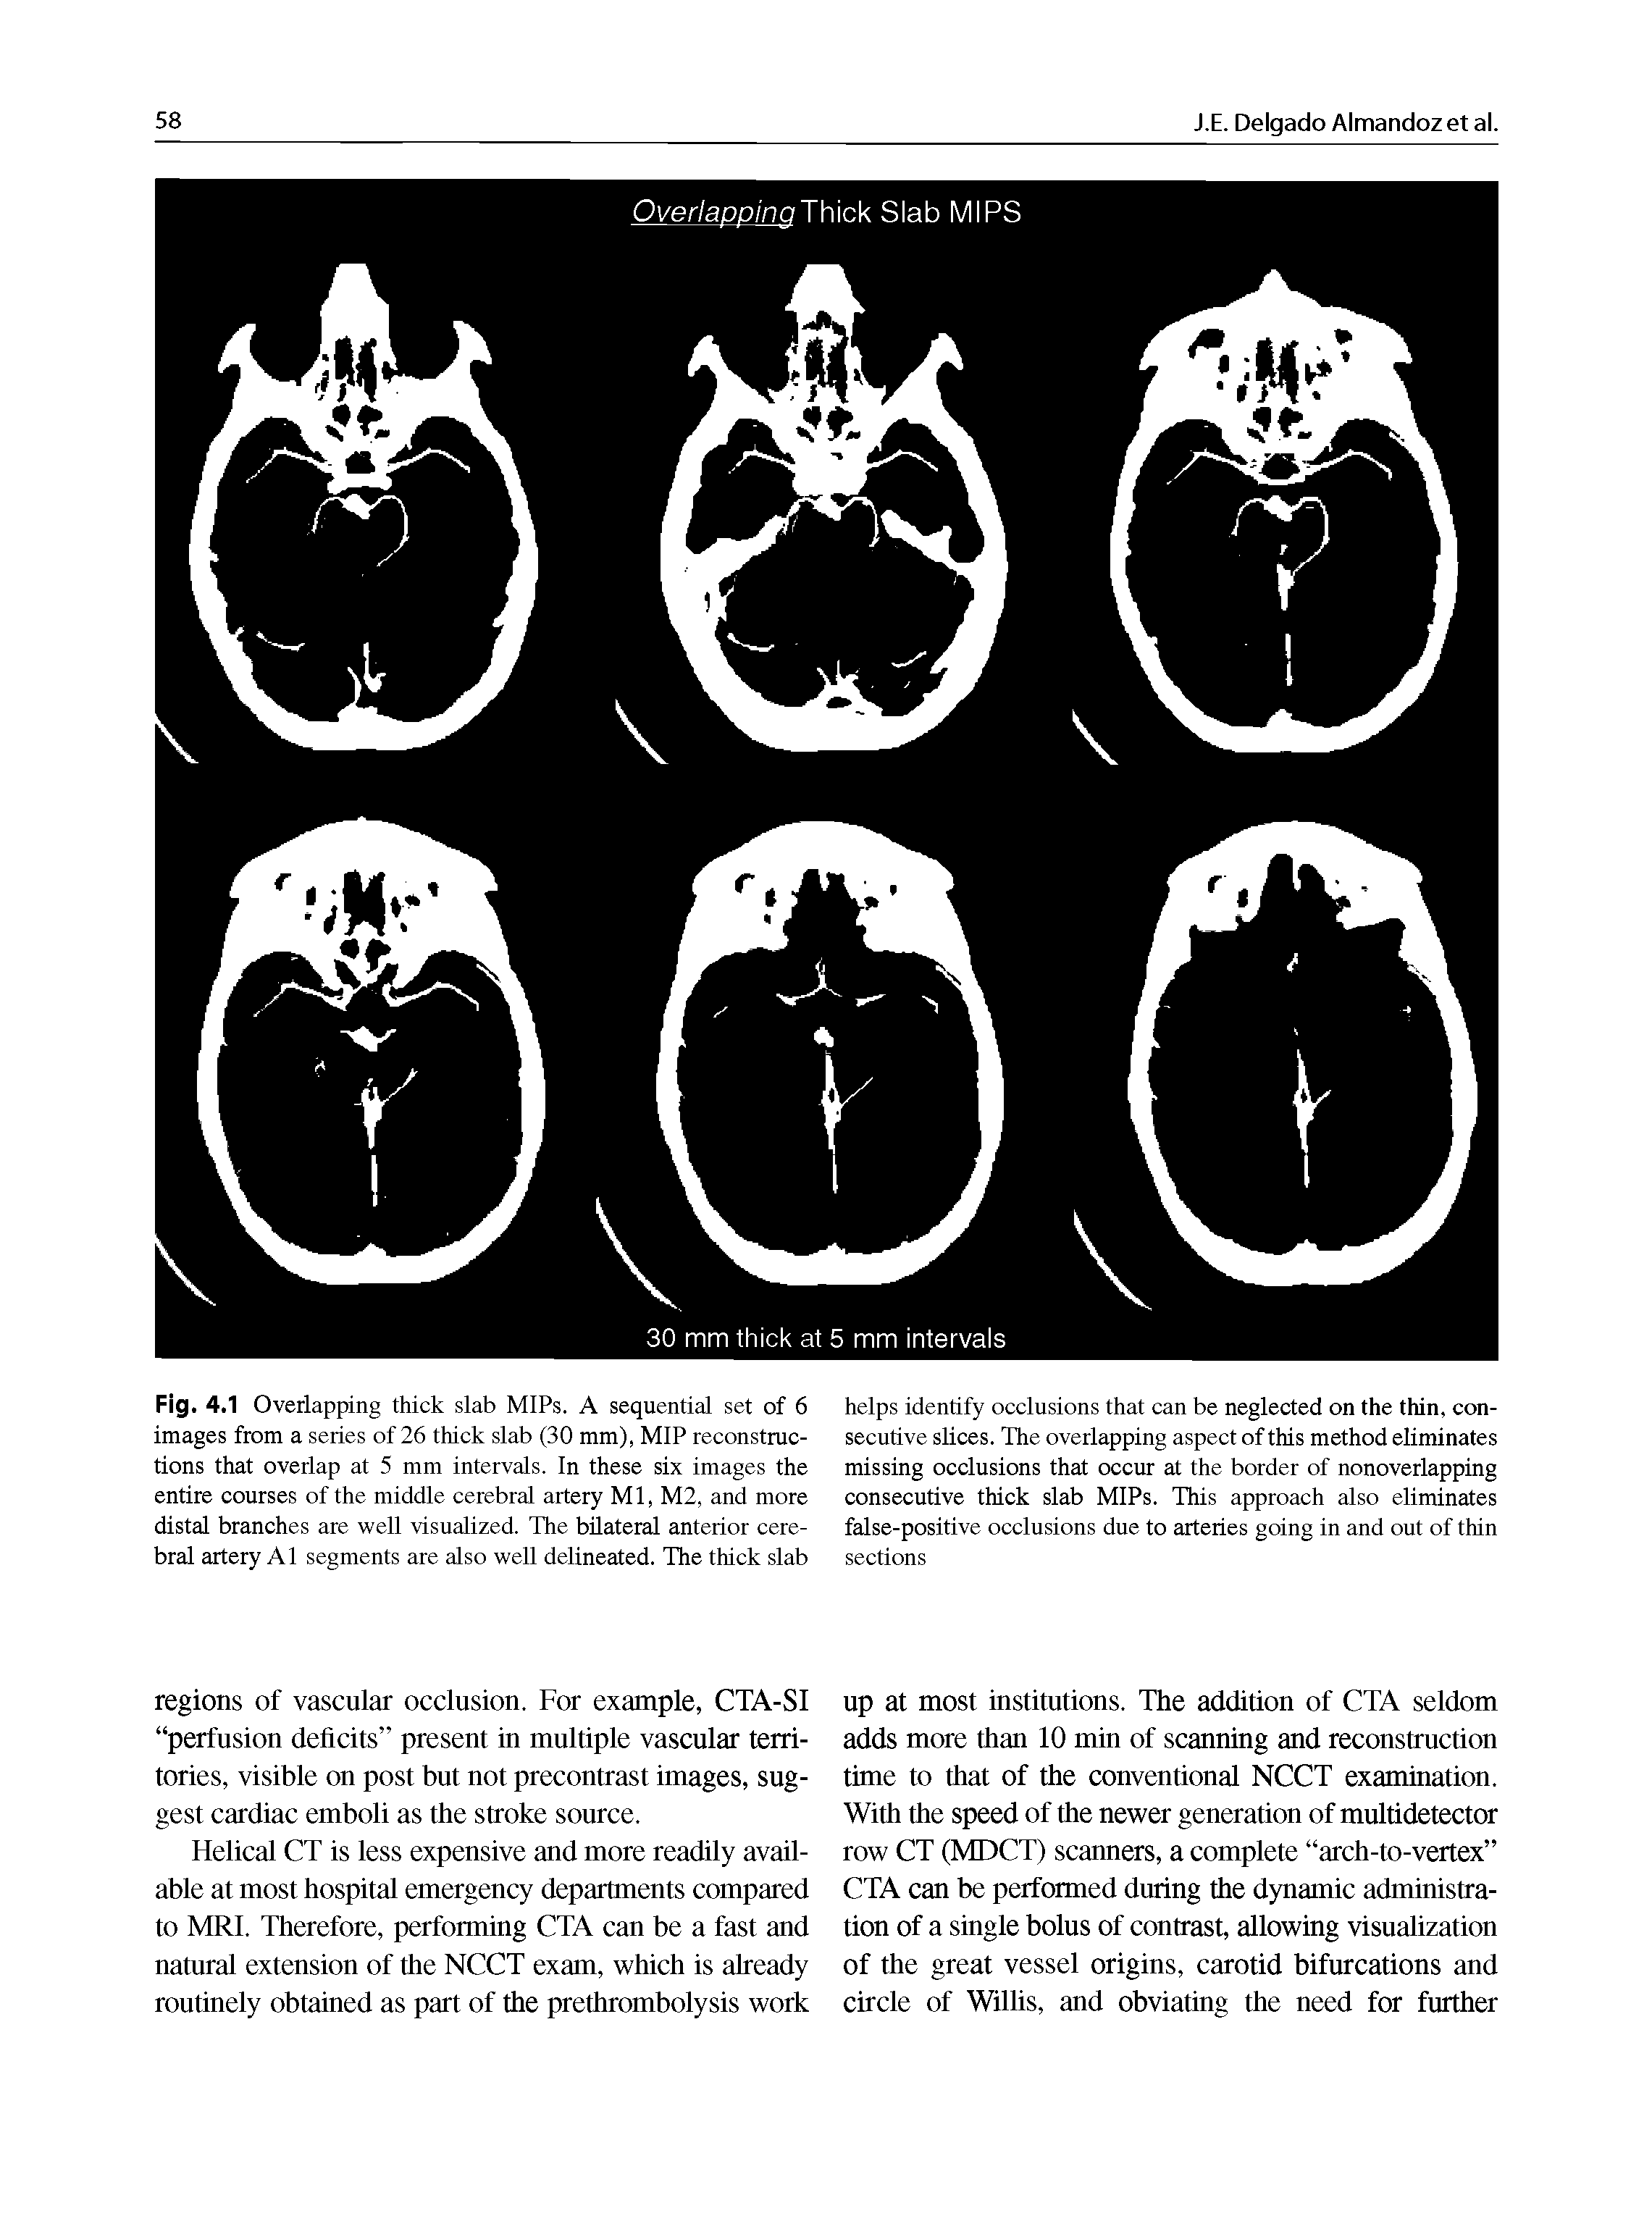 Fig. 4.1 Overlapping thick slab MlPs. A sequential set of 6 images from a series of 26 thick slab (30 mm), MIP reconstructions that overlap at 5 mm intervals, in these six images the entire courses of the middle cerebral artery Ml, M2, and more distal branches are well visualized. The bilateral anterior cerebral artery Al segments are also well delineated. The thick slab...